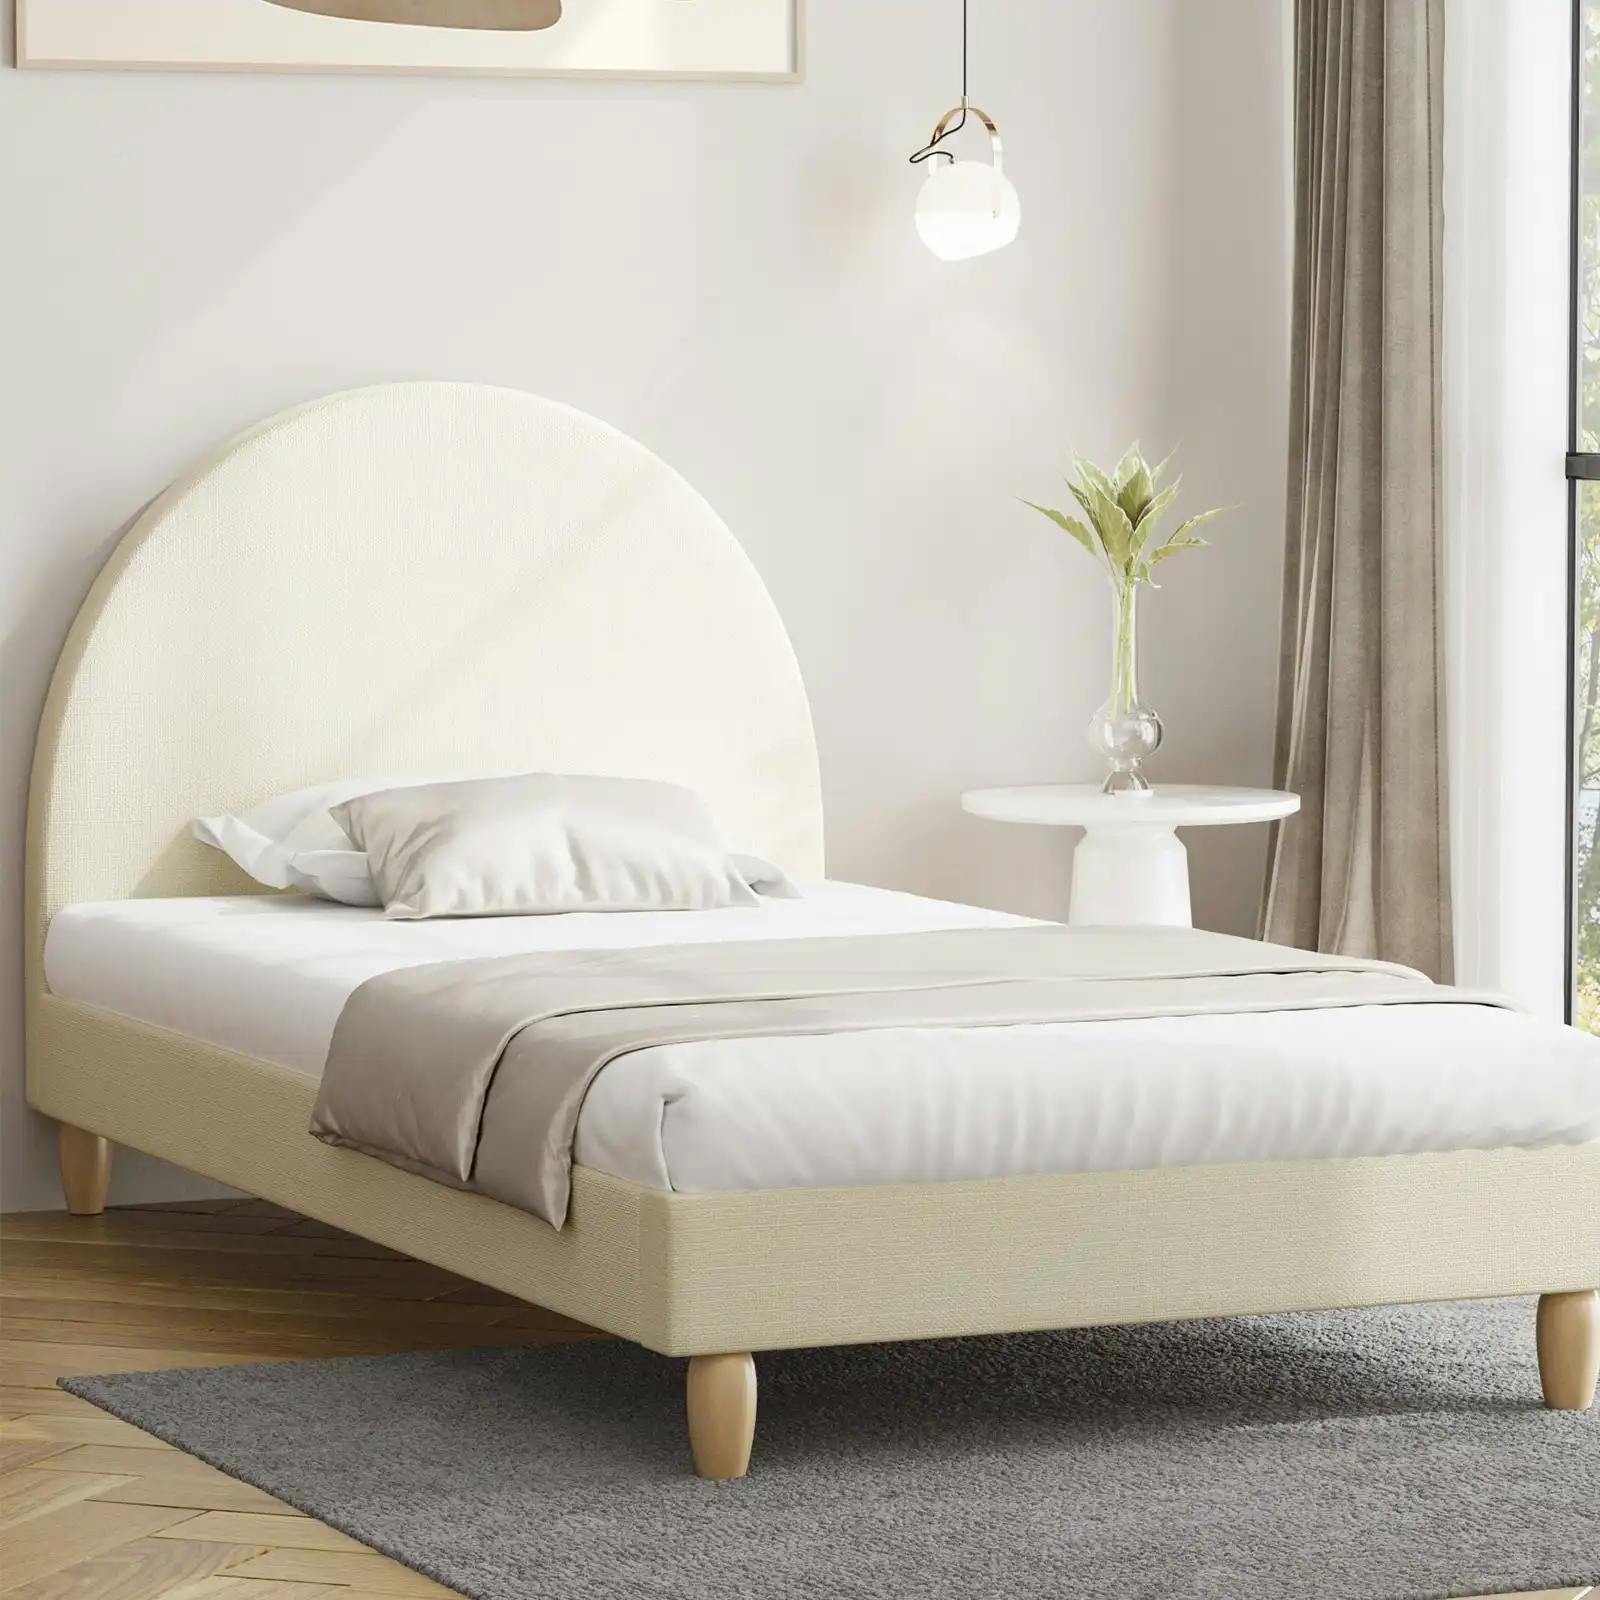 Oikiture Bed Frame Single Size Beige Fabric Arched Beds Platform